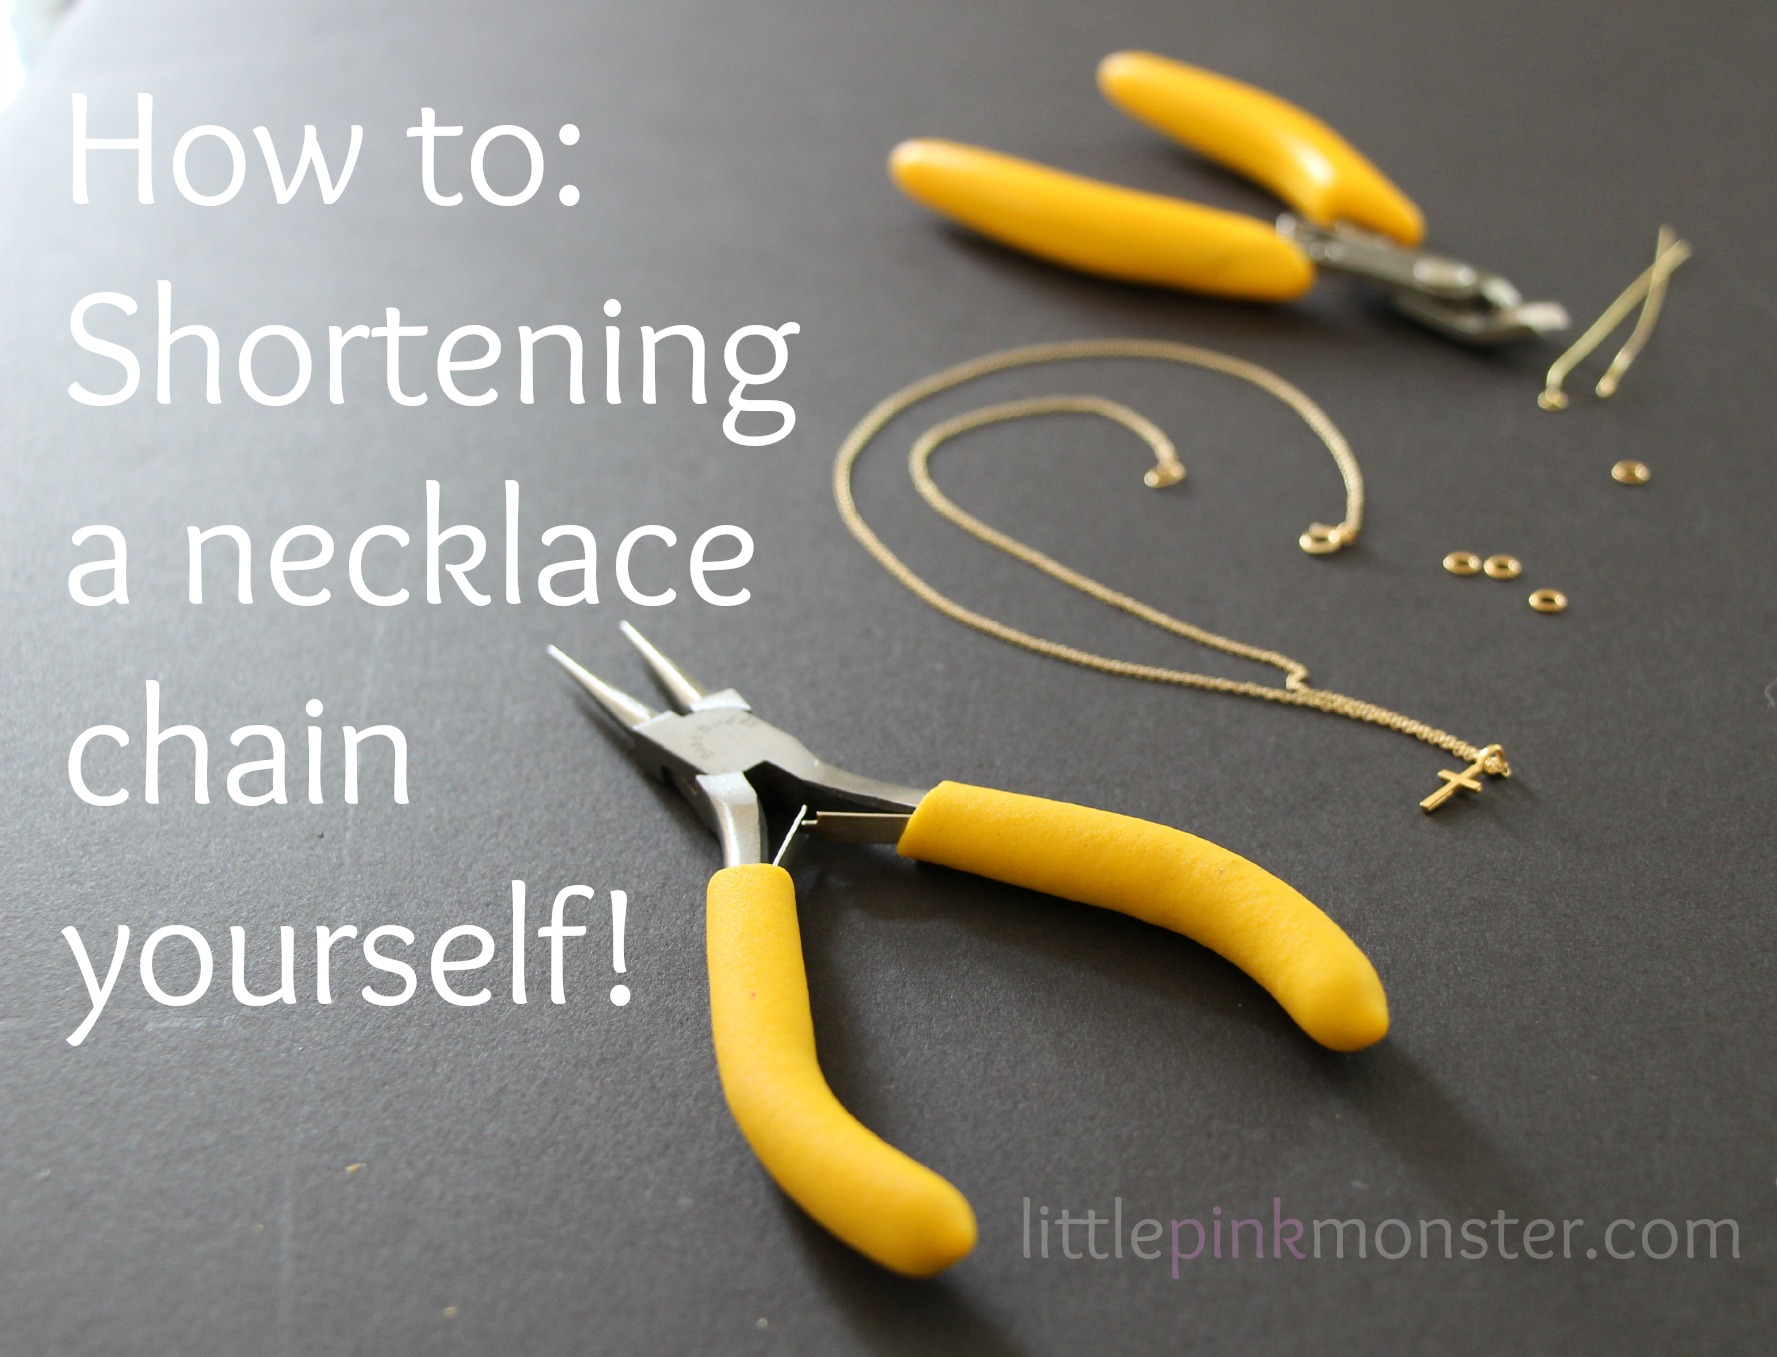 How to shorten a necklace chain yourself